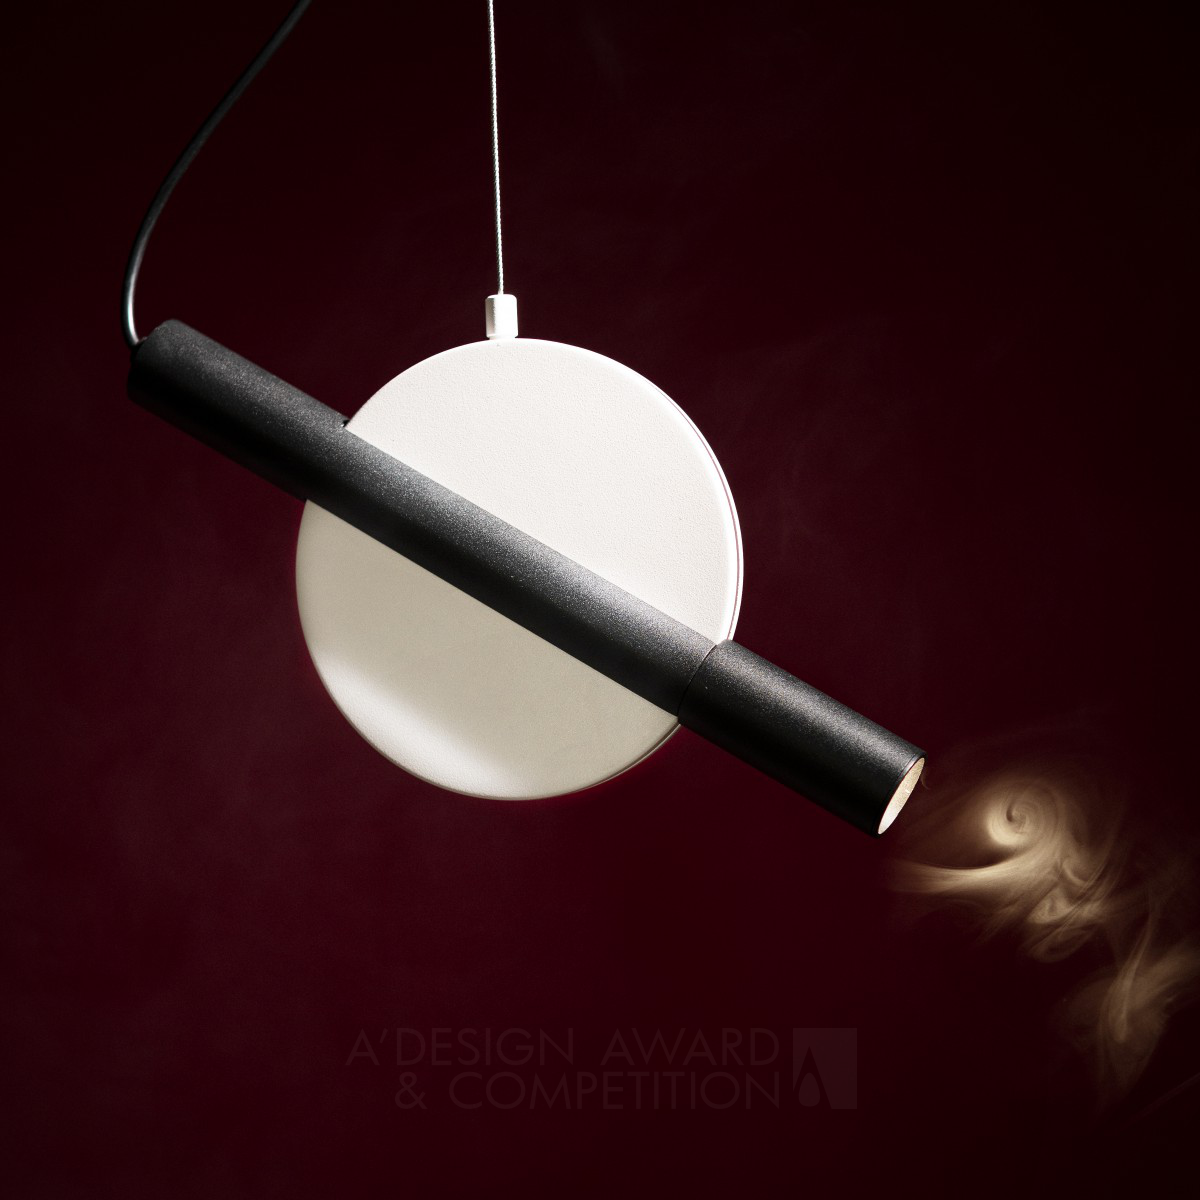 Alexey Danilin wins Silver at the prestigious A' Lighting Products and Fixtures Design Award with Insight Pendant Lamp.